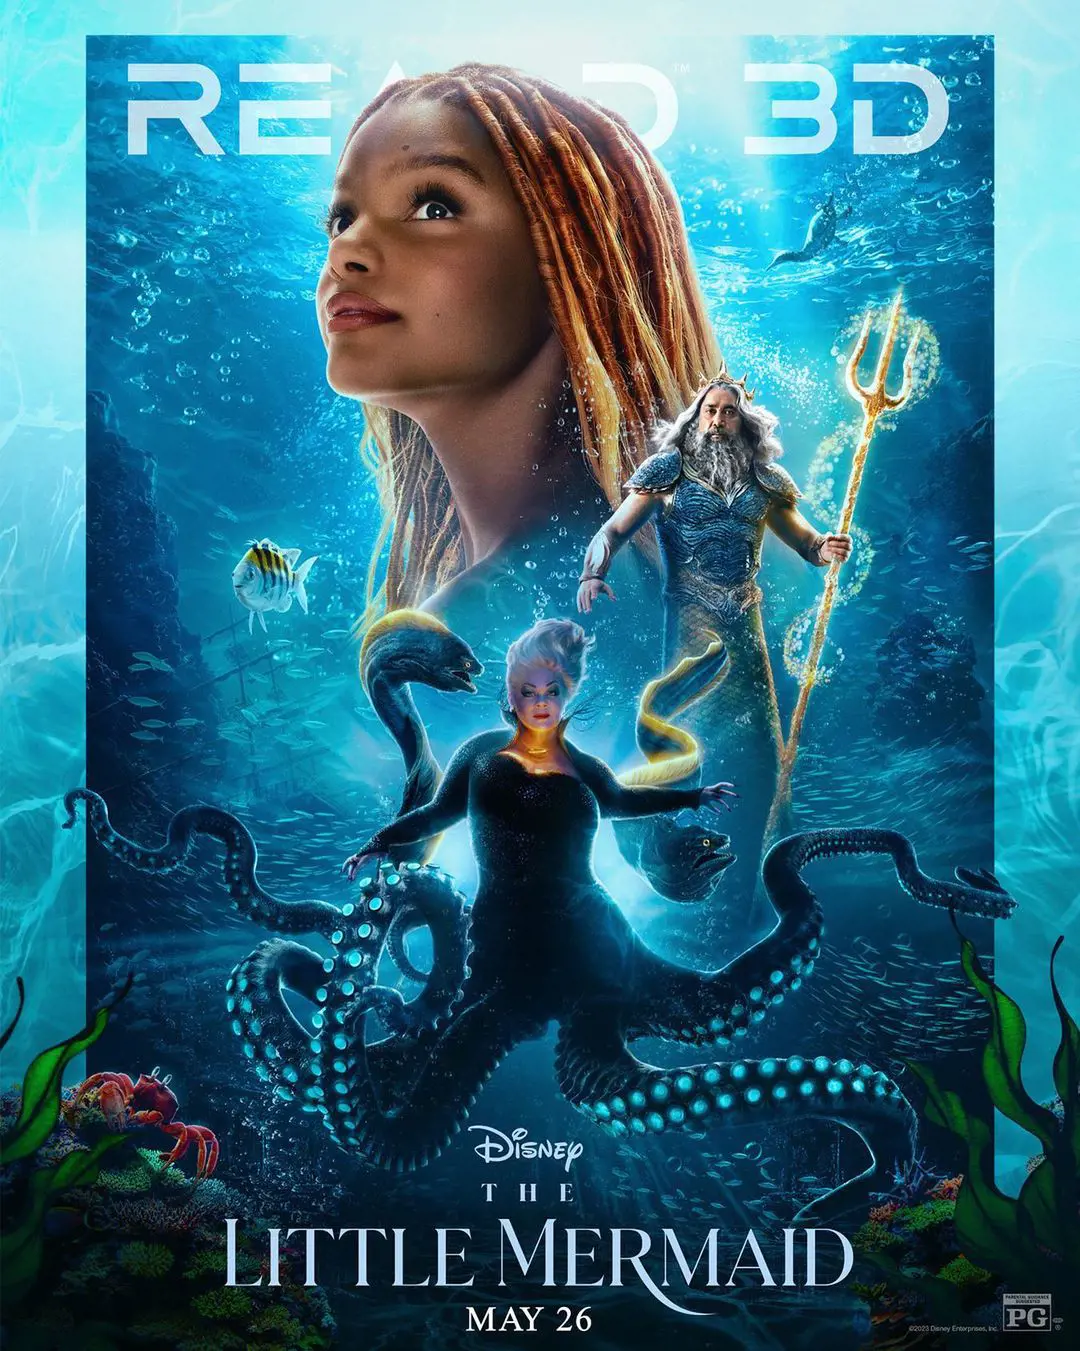 The Little Mermaid film premiered at the Dolby Theatre in Los Angeles on May 8 and its theatrical release is on May 26, 2023